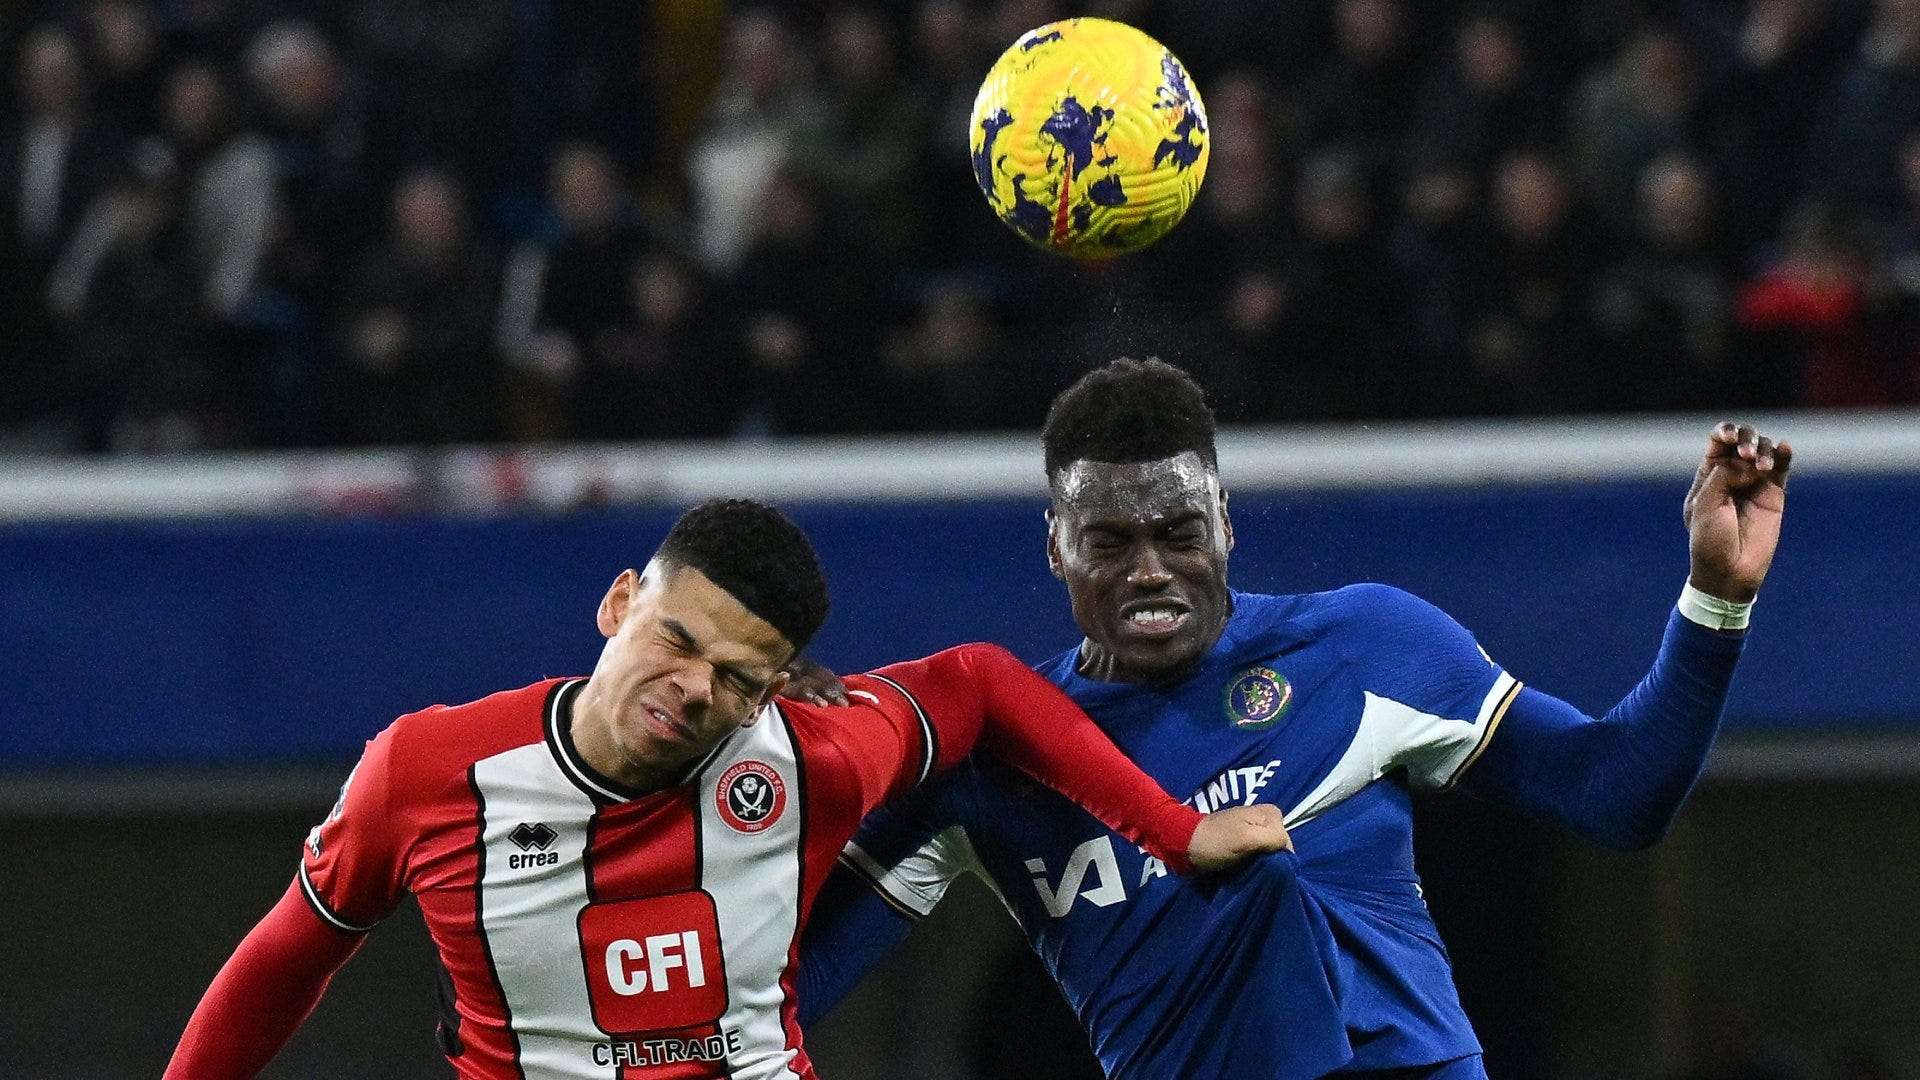 Chelsea player ratings vs Sheffield United: Cole Palmer the match winner  again as Mykhailo Mudryk struggles